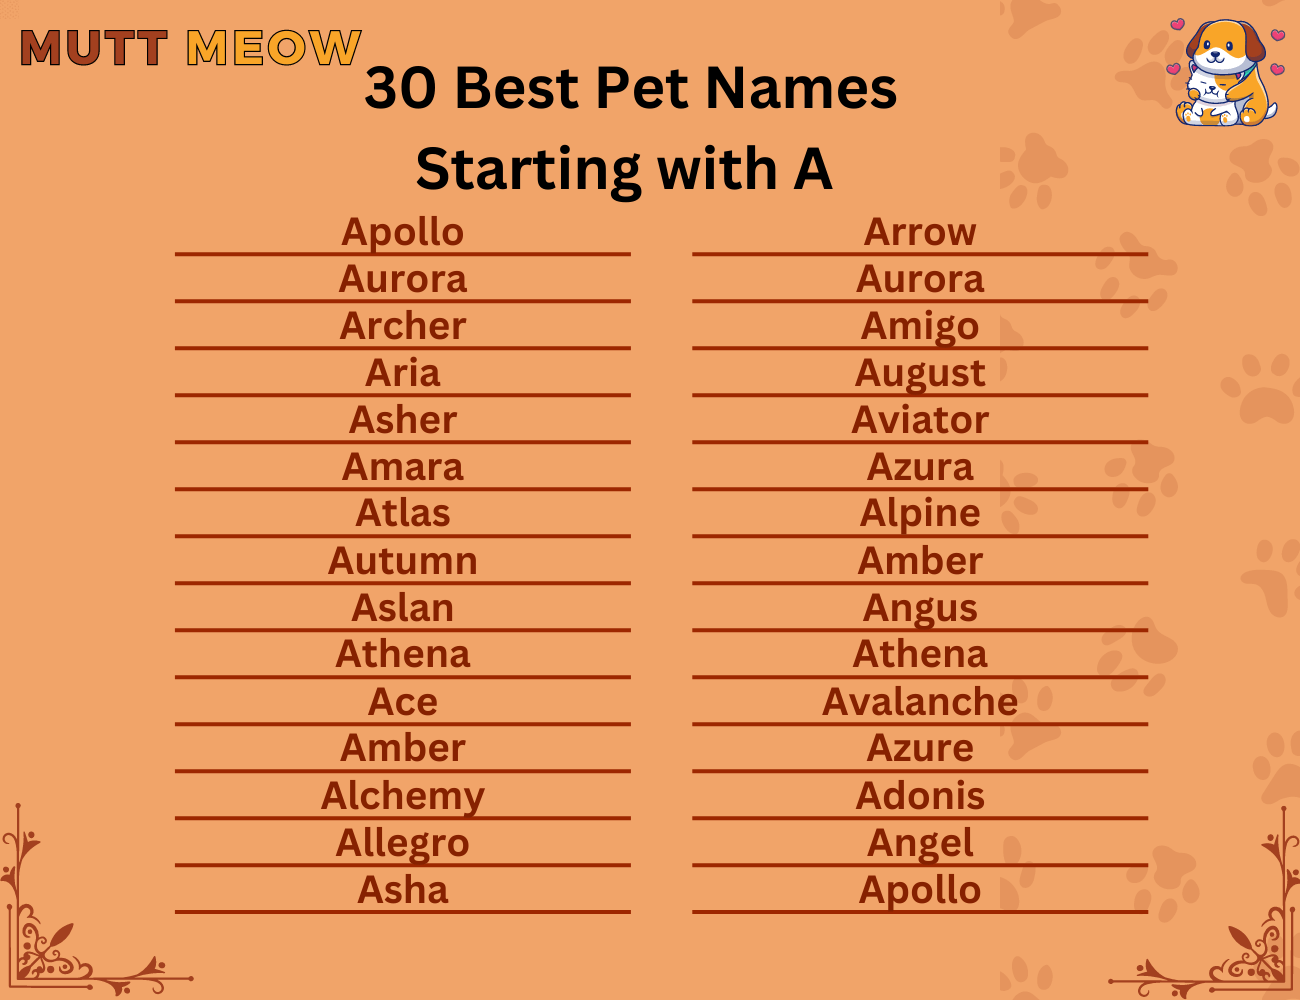 30 Best Pet Names Starting with A